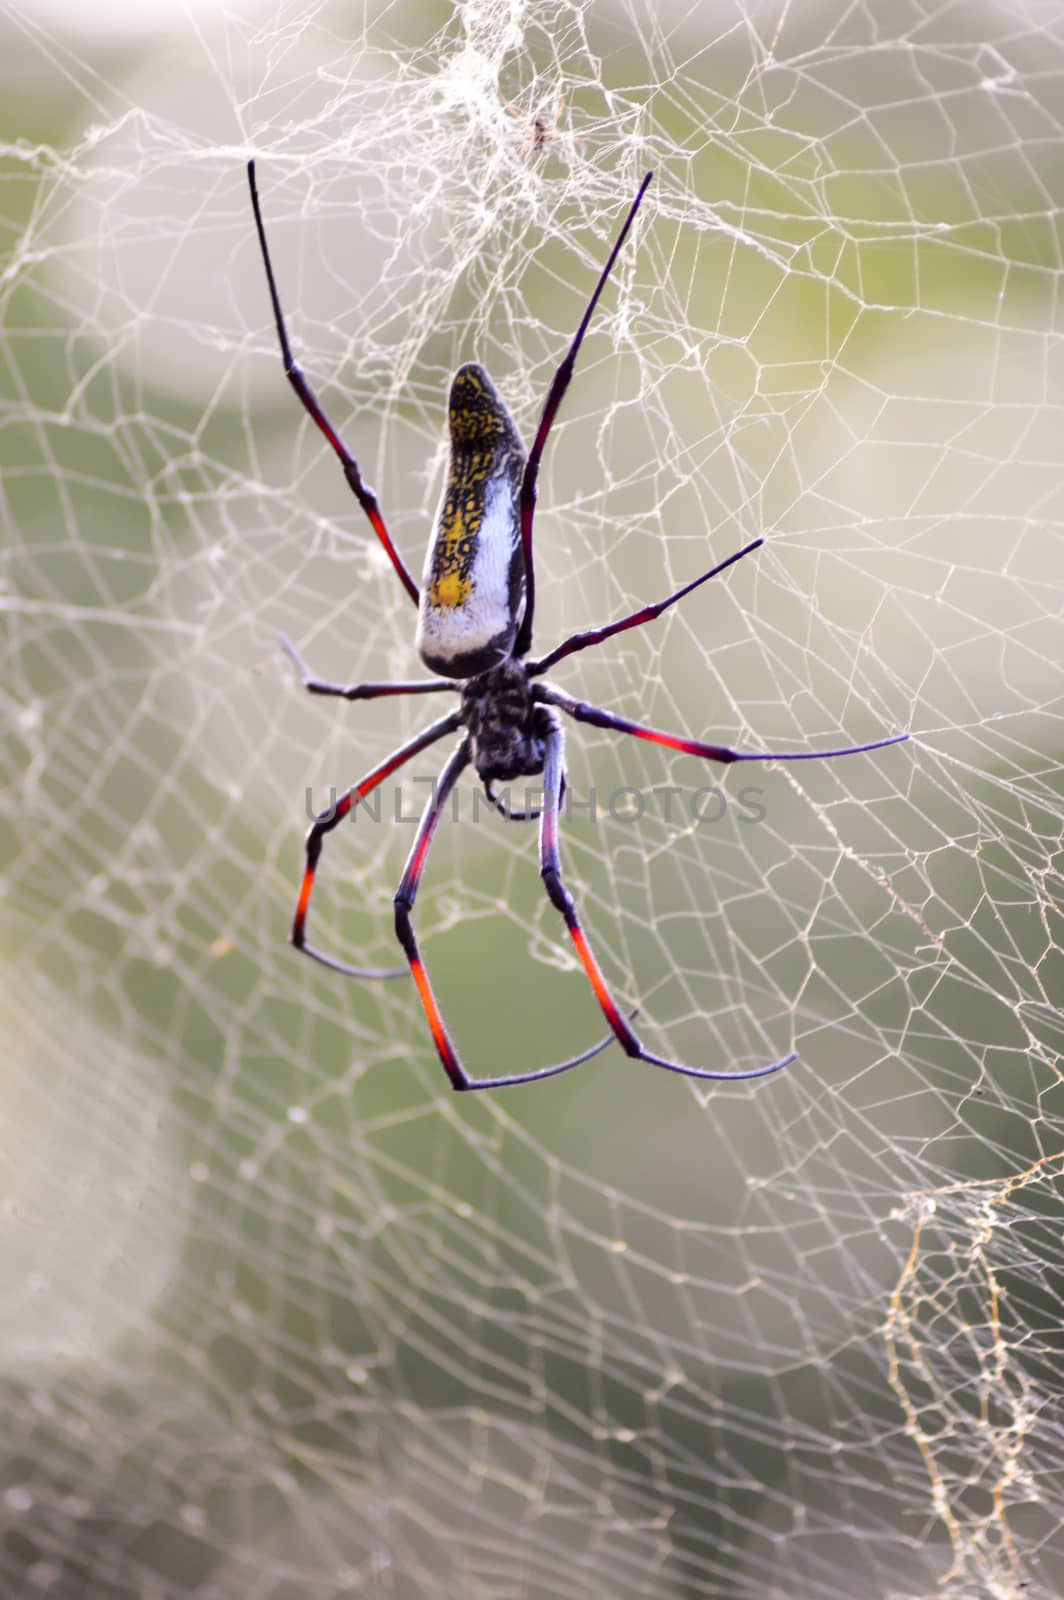 African spider the size of a hand stretched on its web